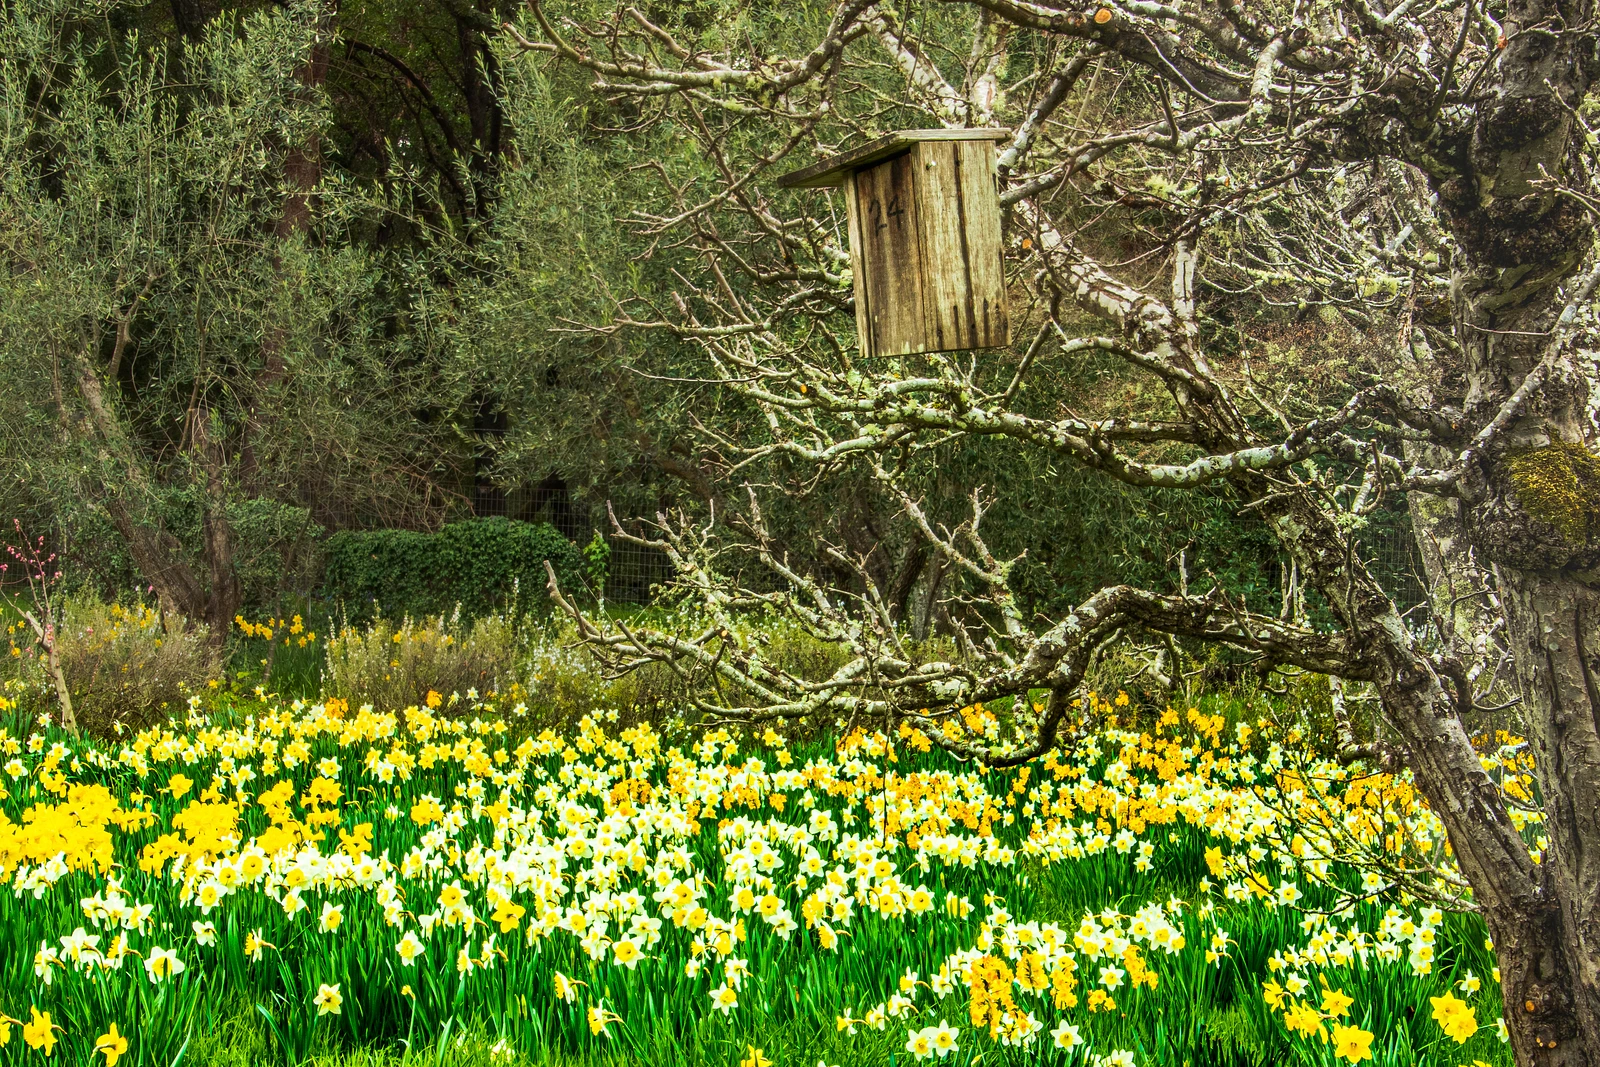 Birdhouse and bed of daffodils